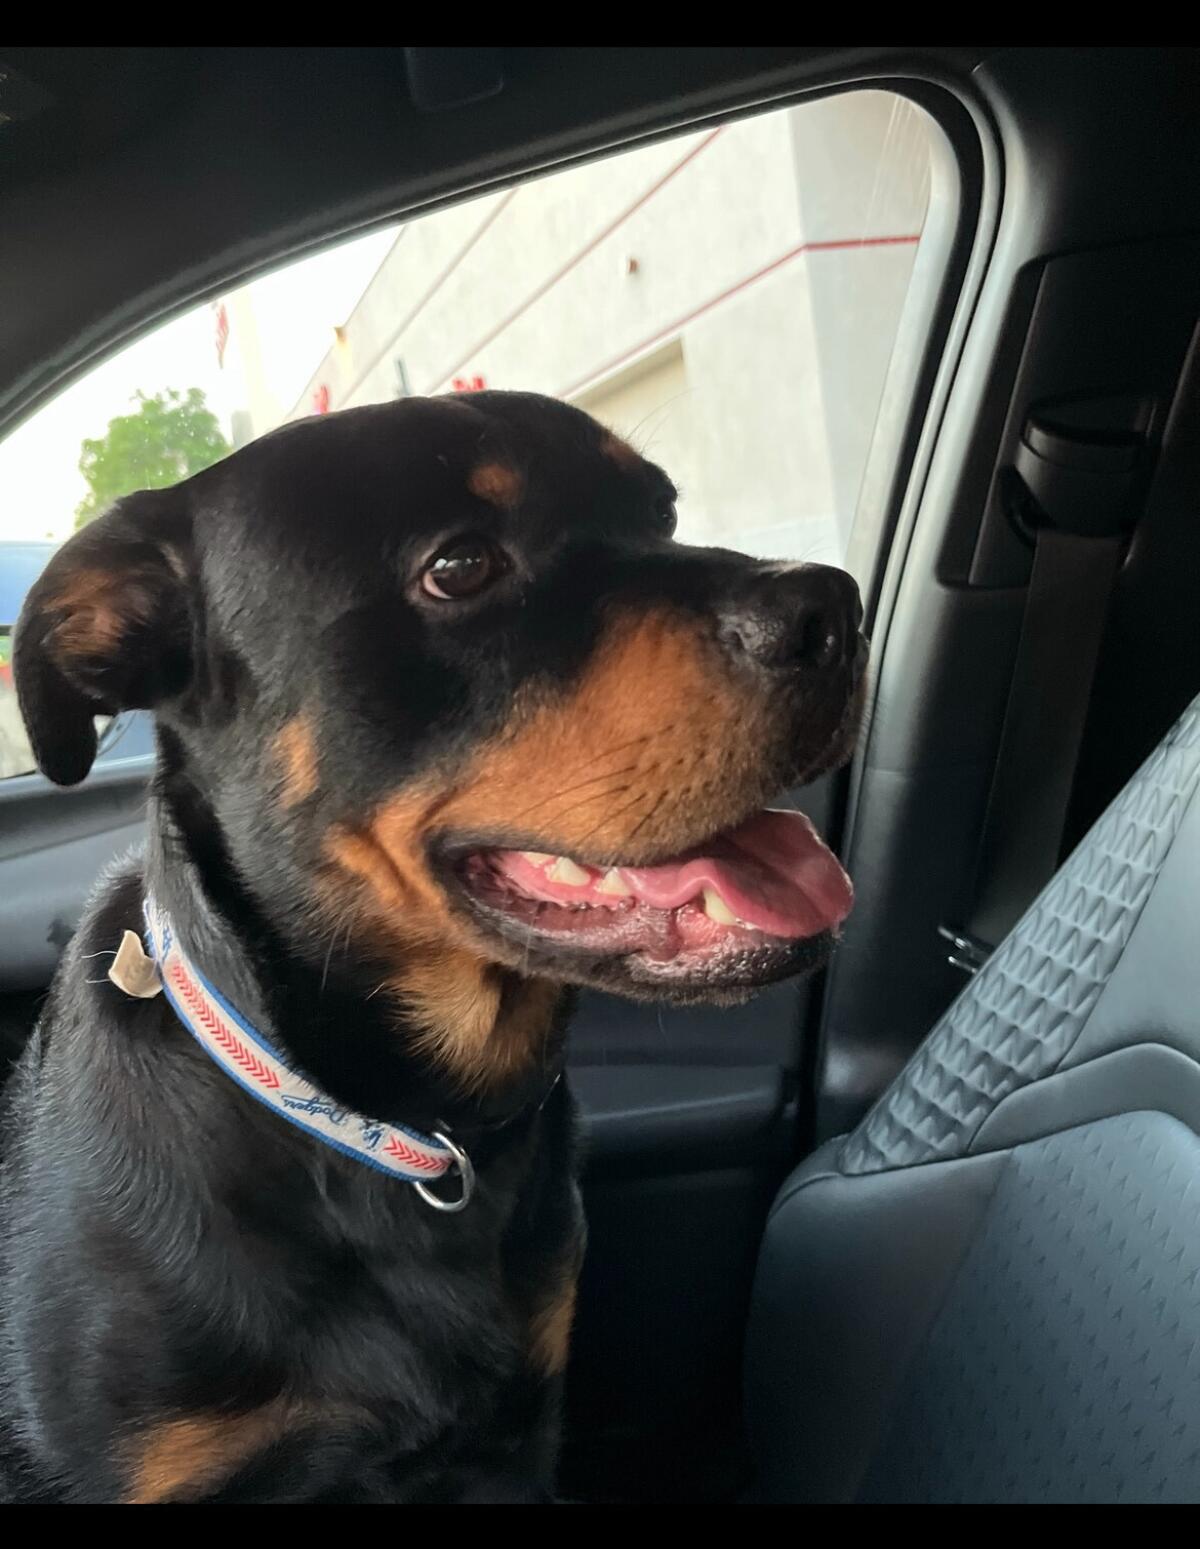 Rocco, a 2-year-old Rottweiler, was stolen from outside his Pasadena home